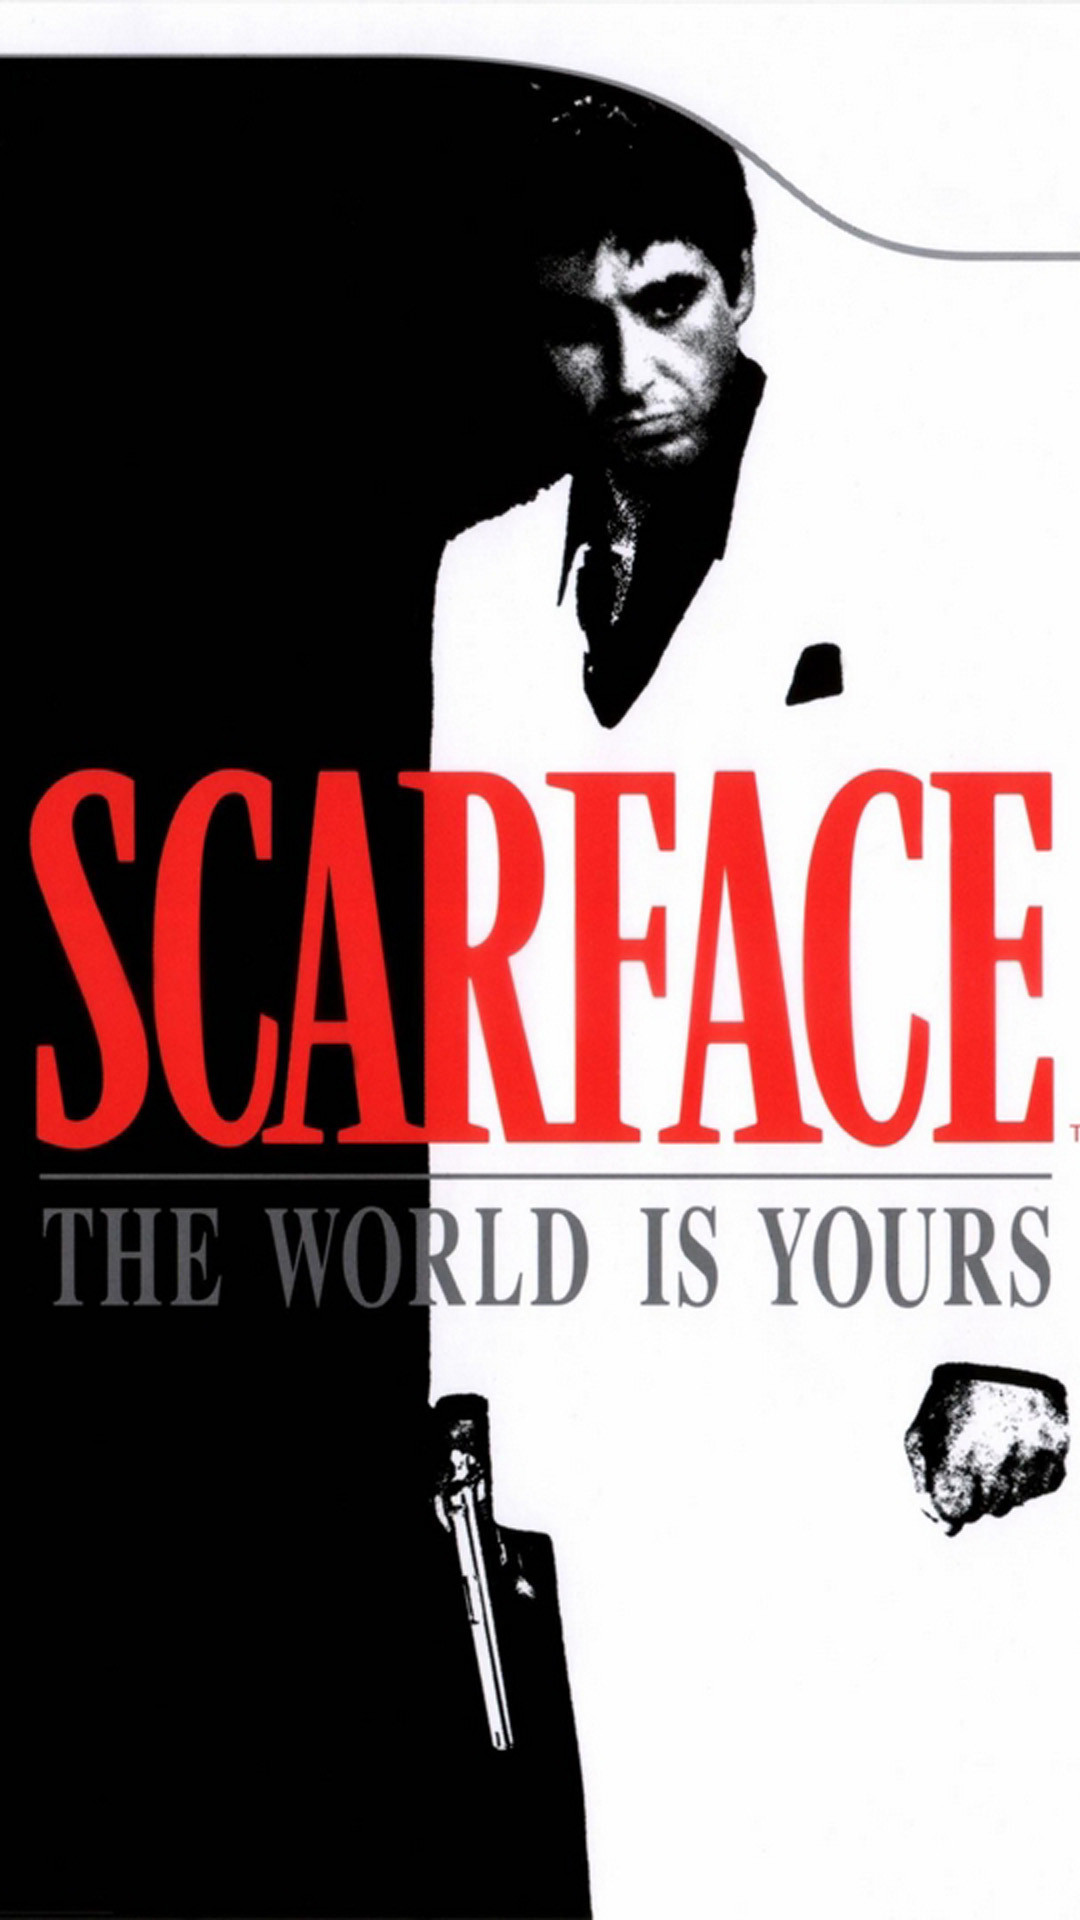 Scarface Wallpaper Hd 72 Images HD Wallpapers Download Free Images Wallpaper [wallpaper981.blogspot.com]